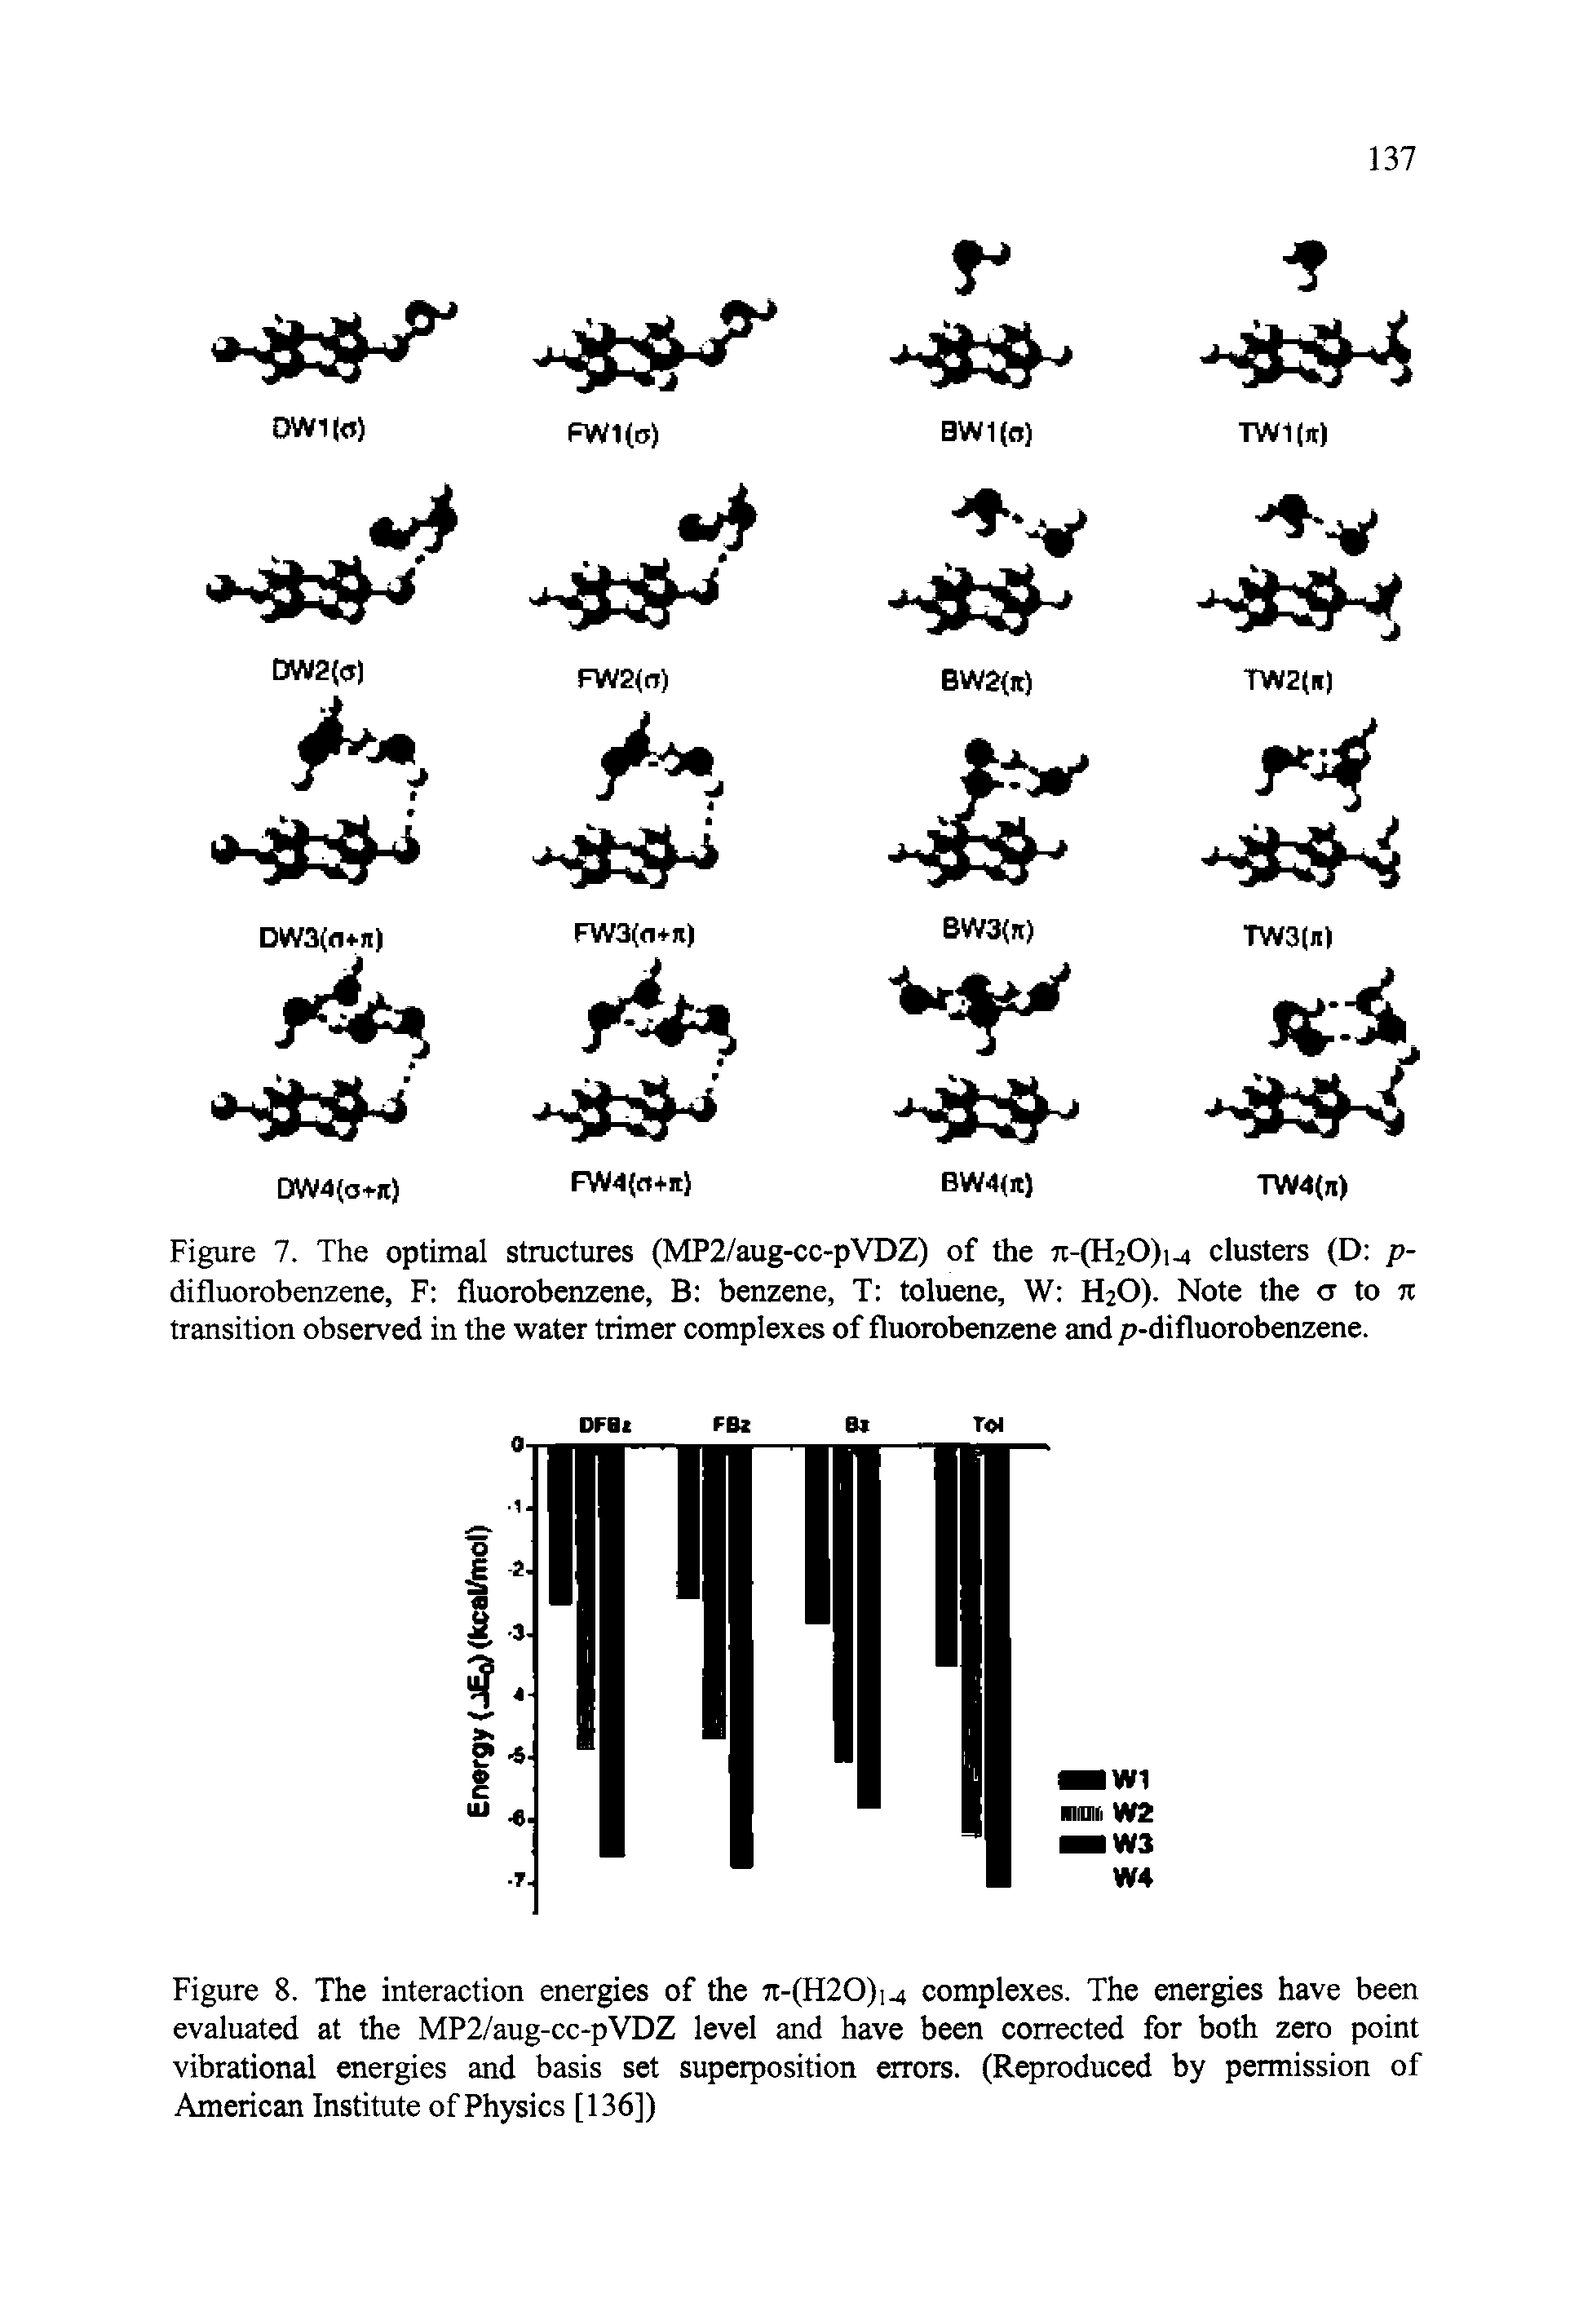 Figure 8. The interaction energies of the 7t-(H20)M complexes. The energies have been evaluated at the MP2/aug-cc-pVDZ level and have been corrected for both zero point vibrational energies and basis set superposition errors. (Reproduced by permission of American Institute of Physics [136])...